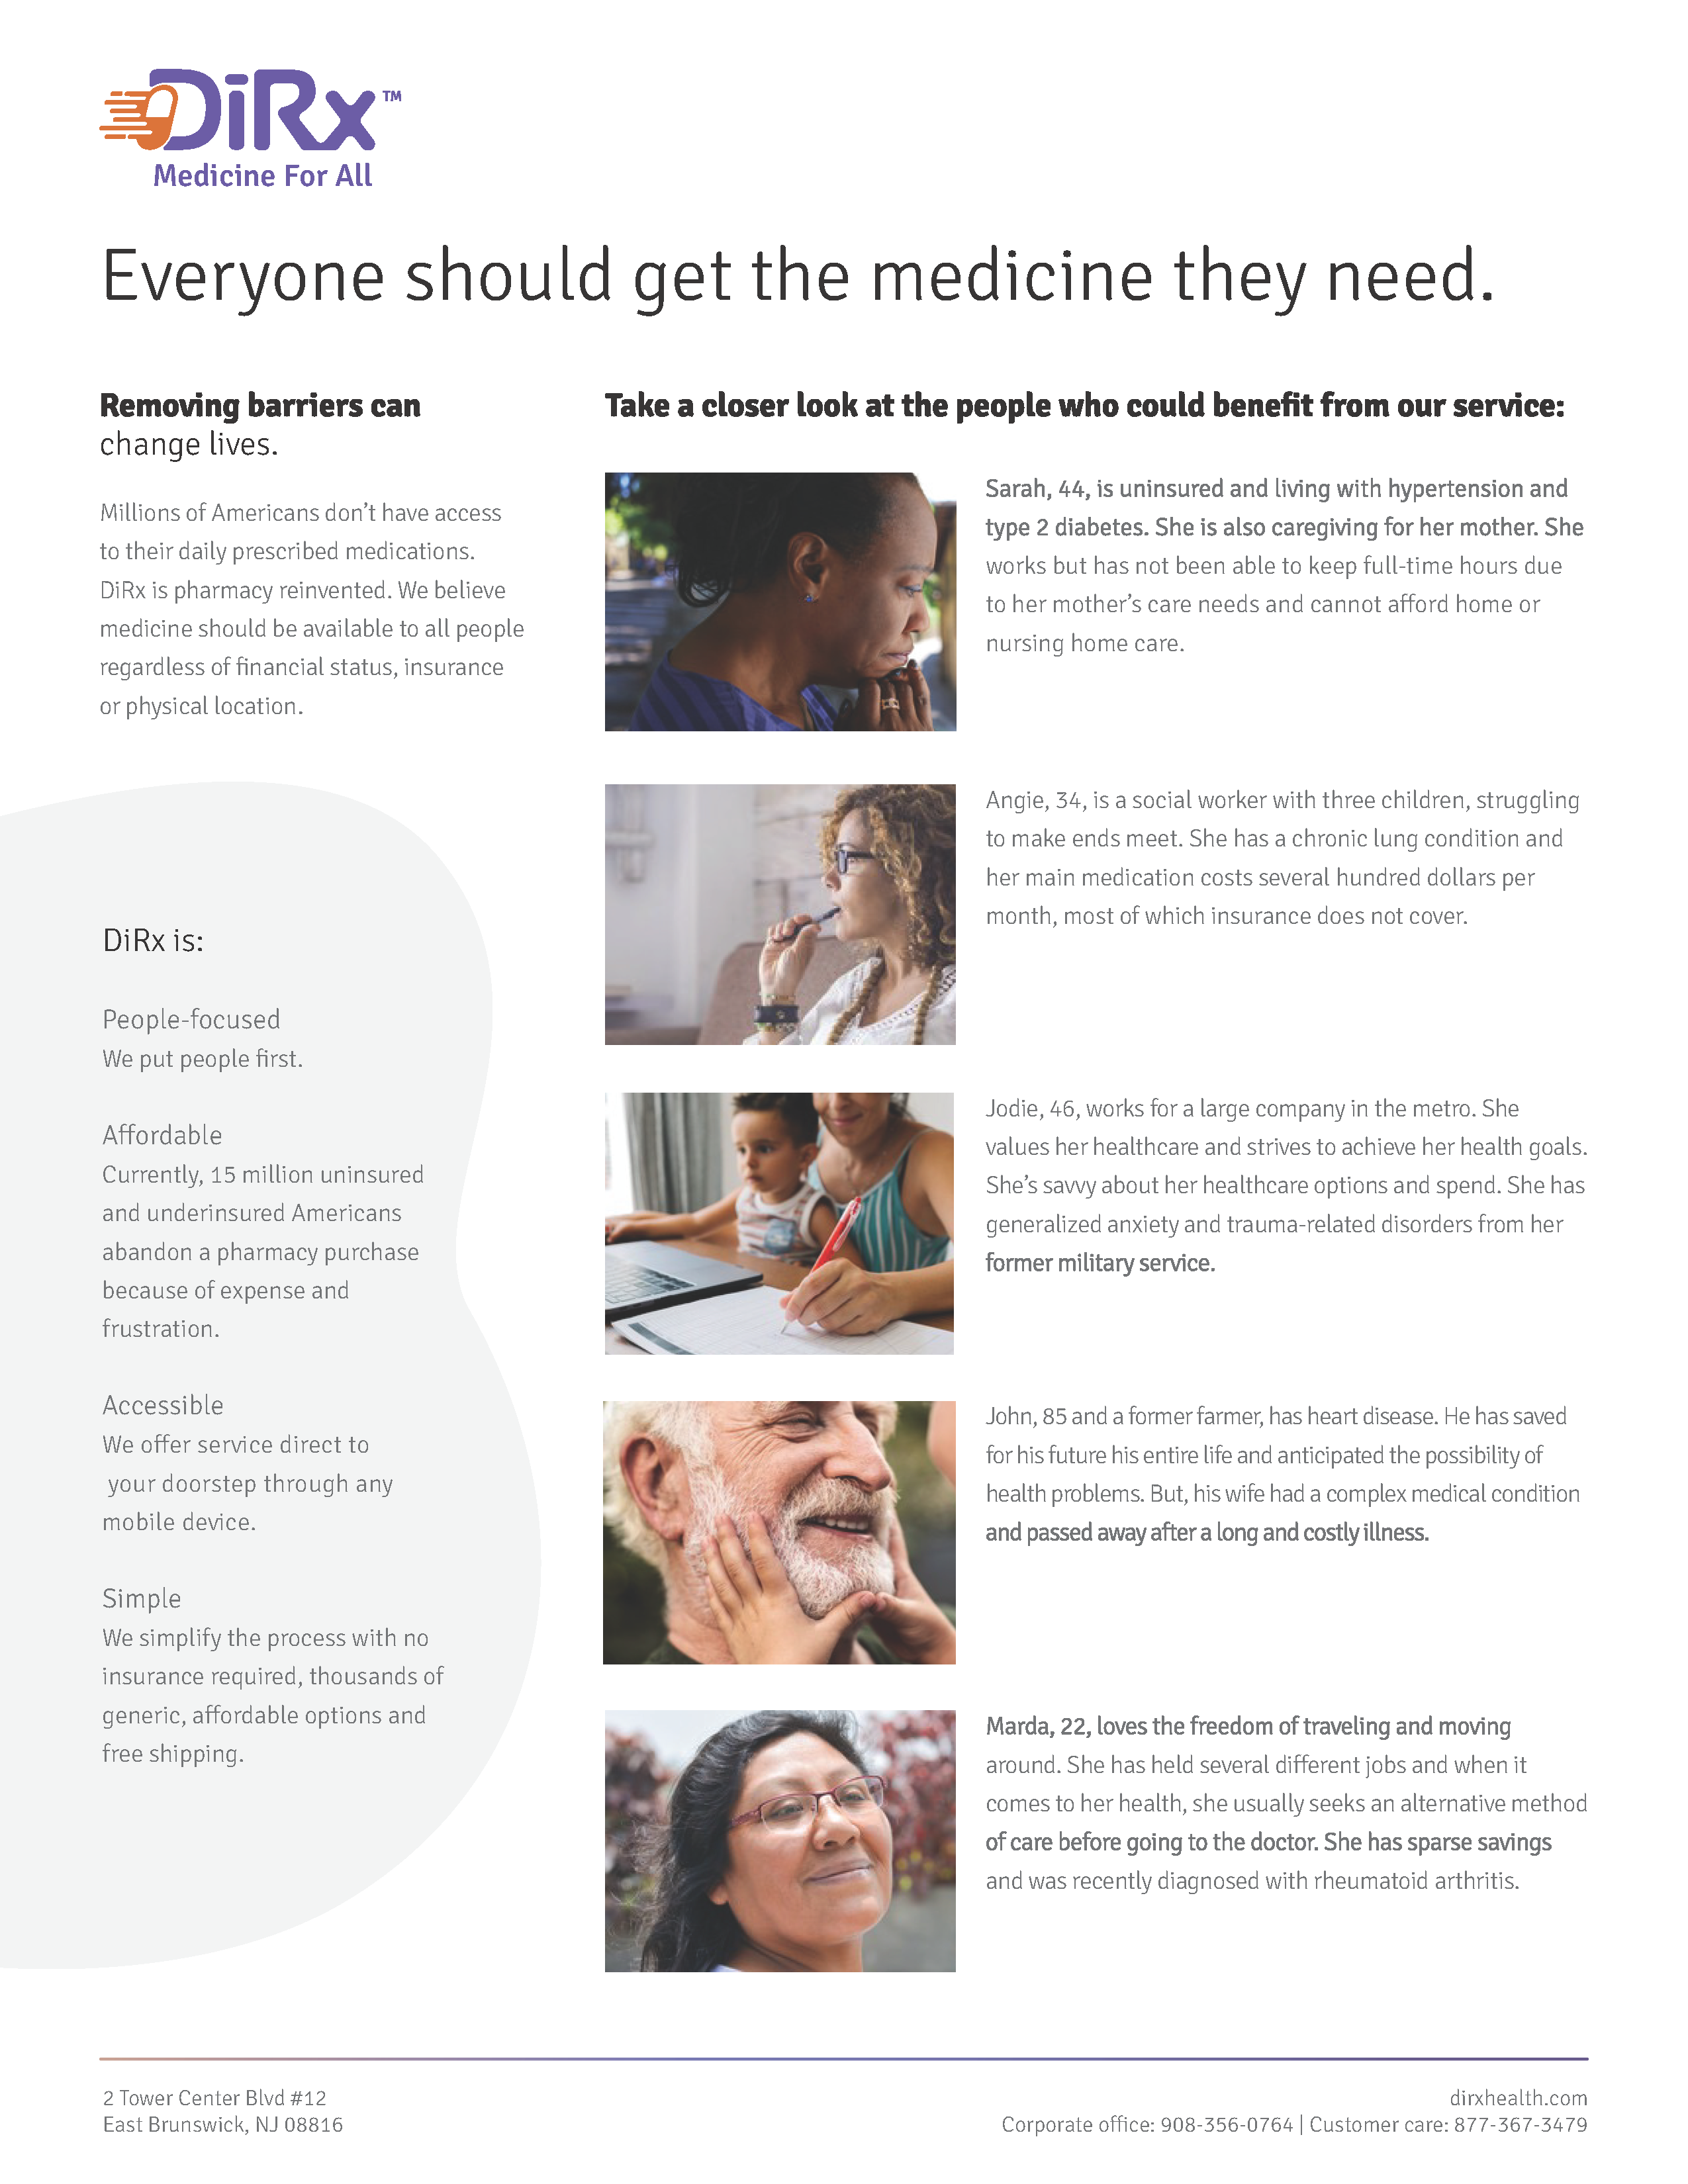 DiRx USA  - medicine should be available to all people regardless of financial status, insurance or physical location.